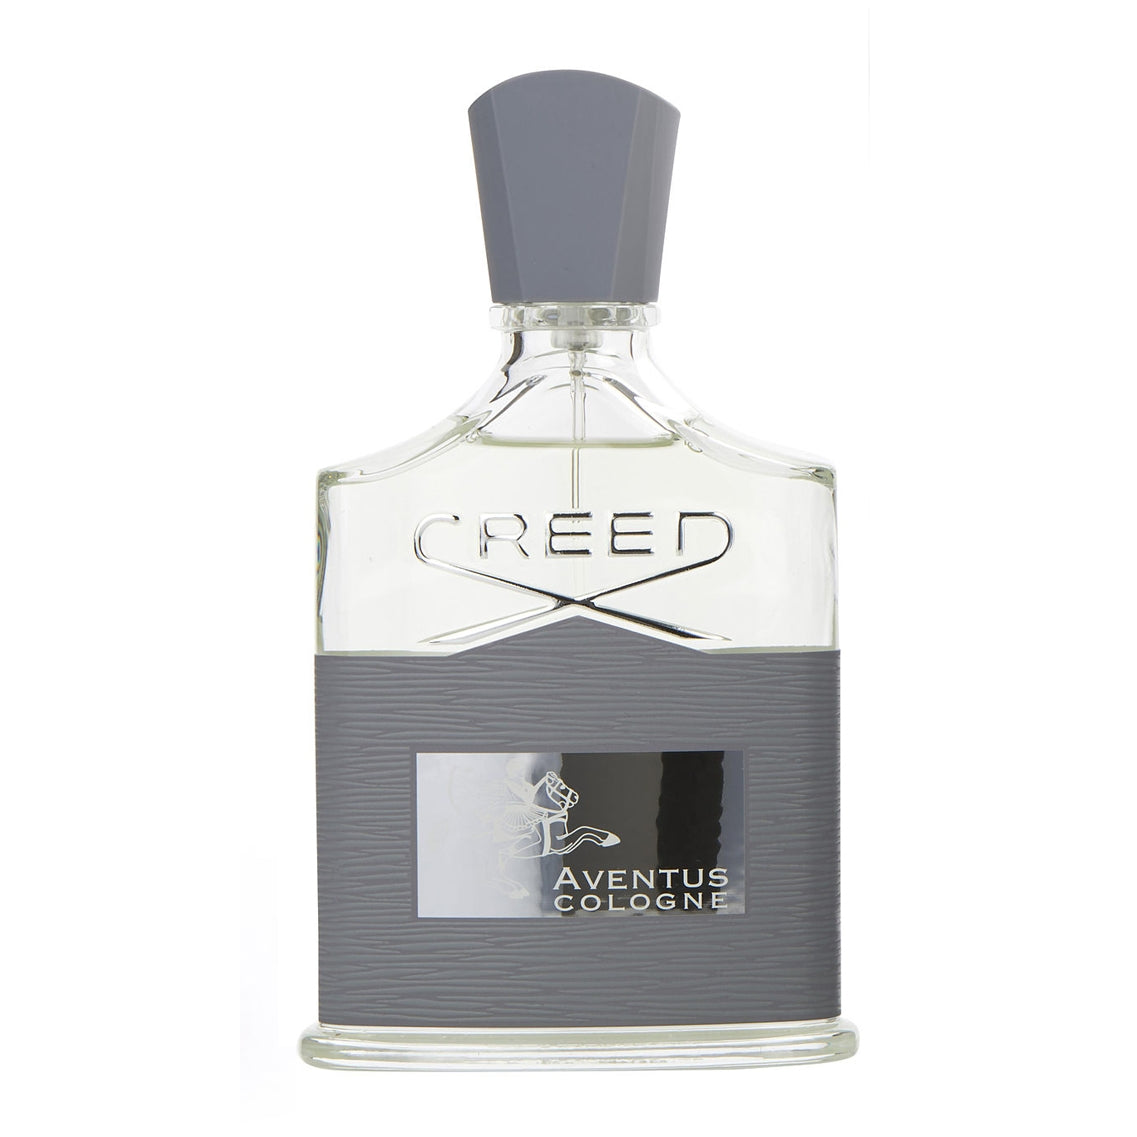 Aventus Cologne by Creed Fragrance | DecantX | Eau de Parfum Scent Sampler and Travel Size Perfume Atomizer